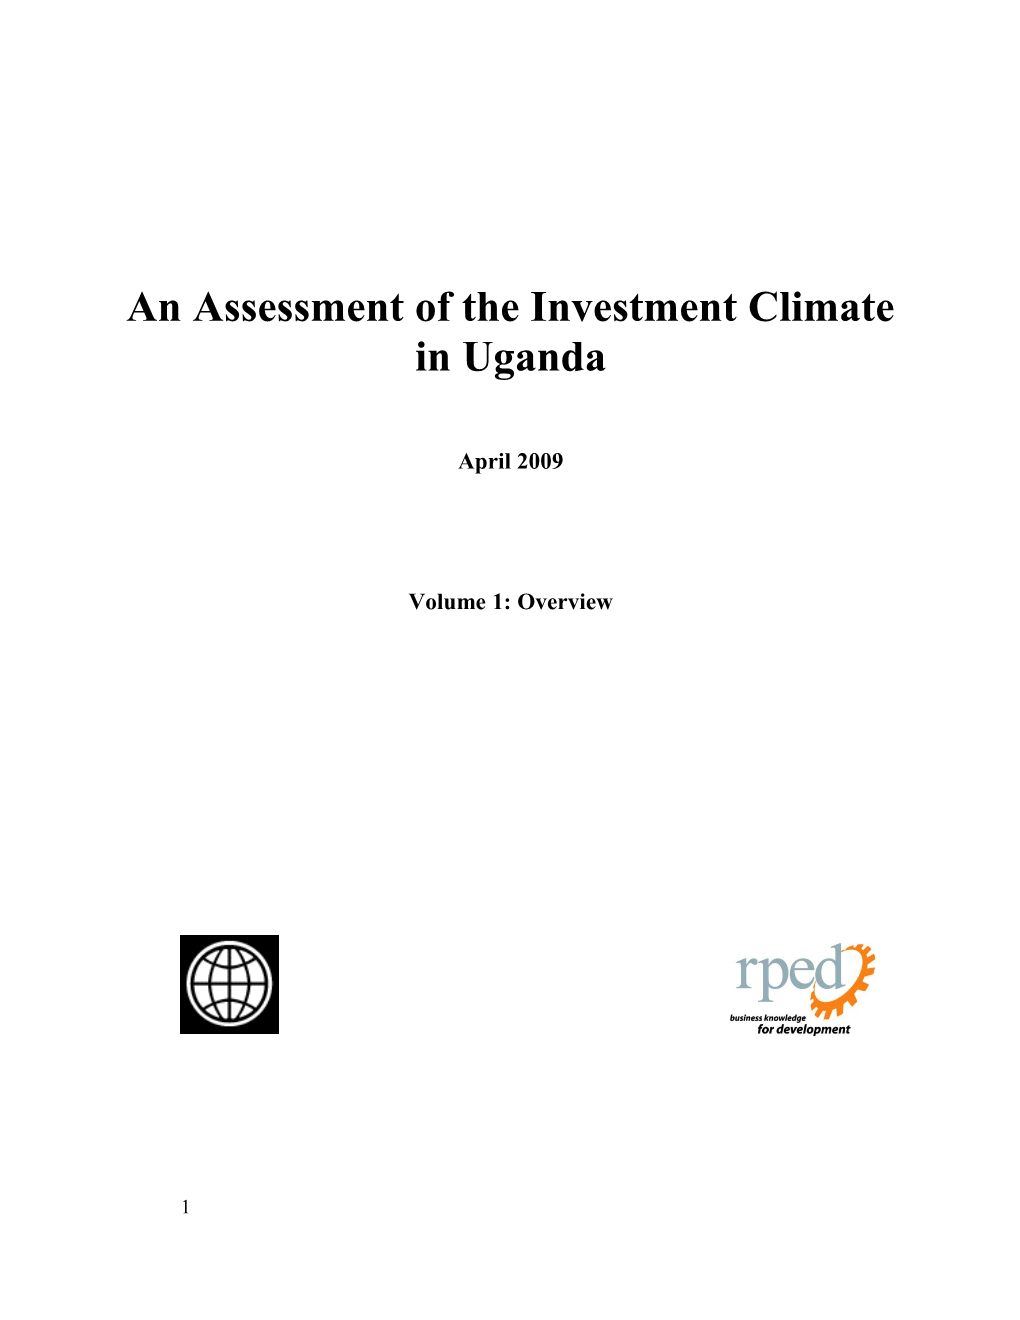 An Assessment of the Investment Climate in Uganda